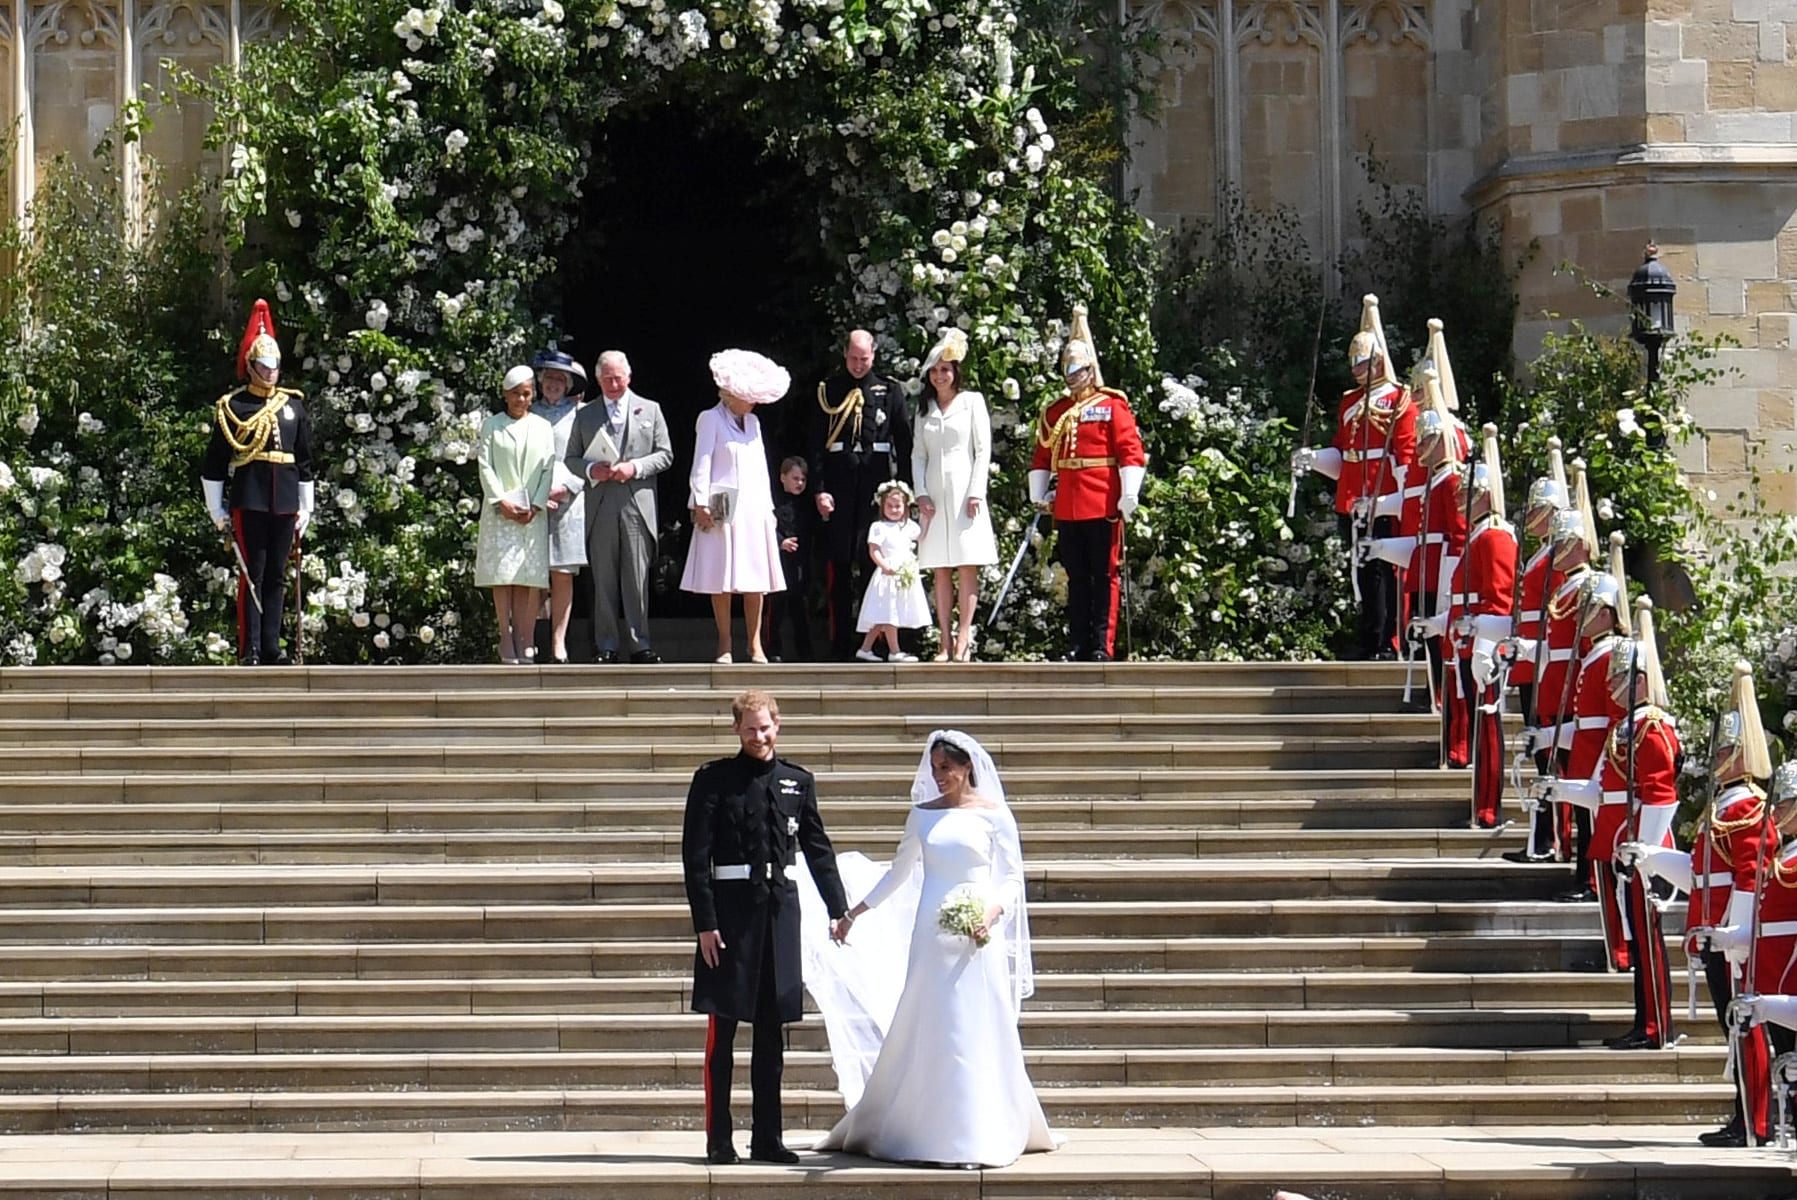 Britain's Prince Harry (L), Duke of Sussex and Meghan (R), Duchess of Sussex exit St George's Chapel in Windsor Castle after their royal wedding ceremony, in Windsor, Britain, 19 May 2018. The couple have been bestowed the royal titles of Duke and Duchess of Sussex on them by the British monarch.  NEIL HALL/Pool via REUTERS - RC13A9C94CA0